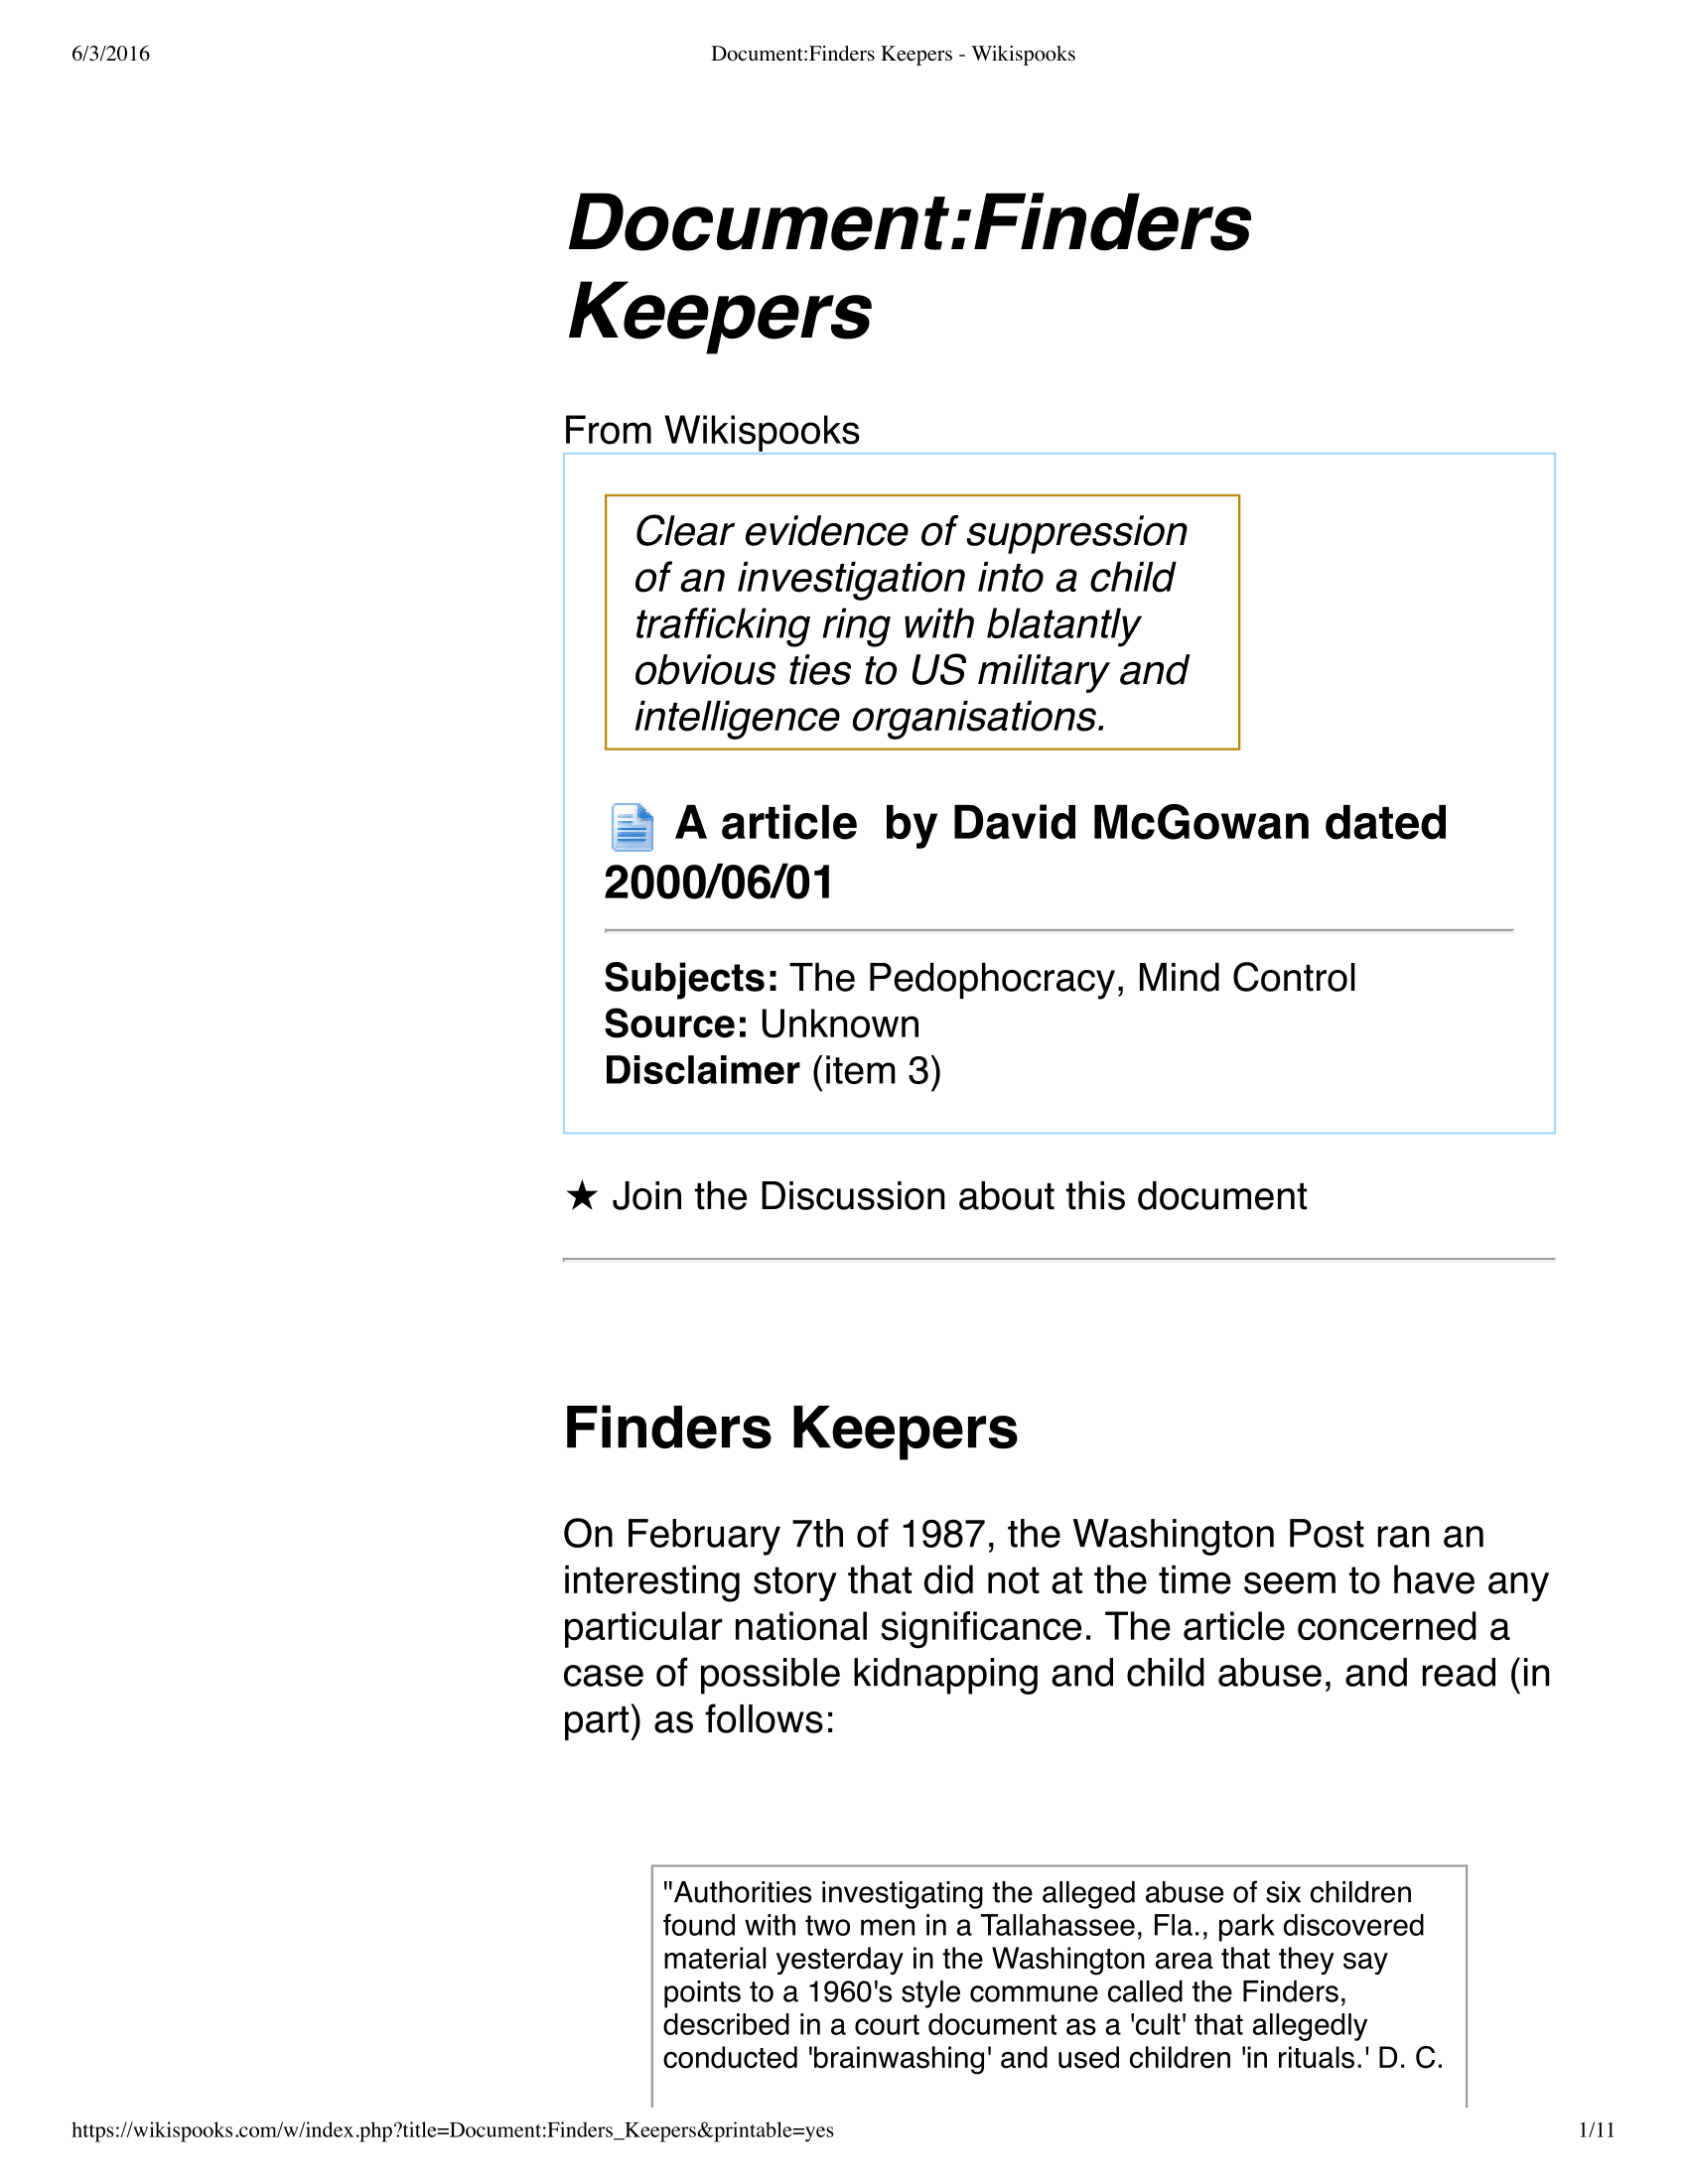 Document_findersKeepers-Wikispooks-11-01.png